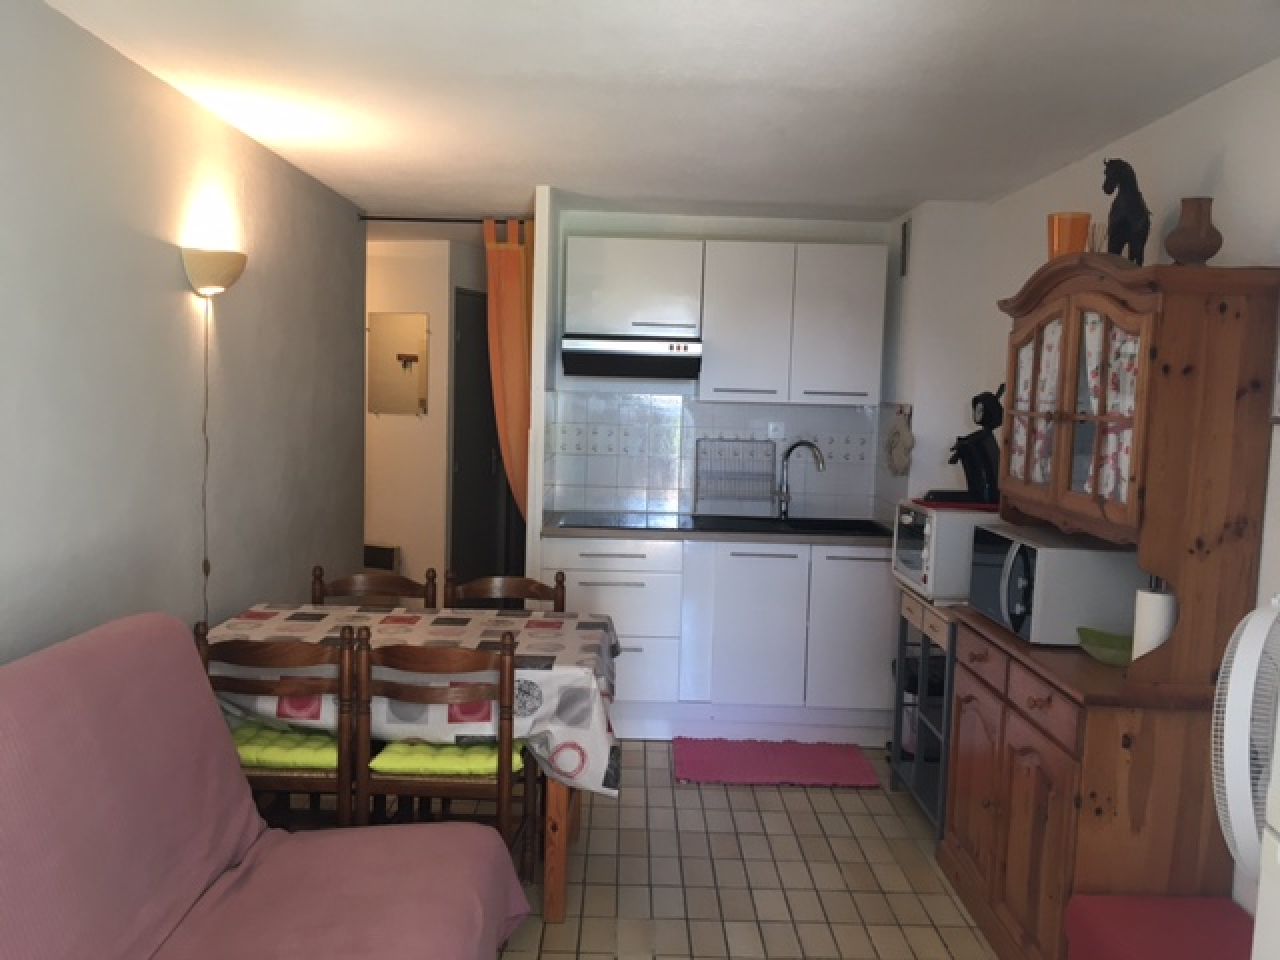 Location appartement Le Baracrs N°2640 image 3